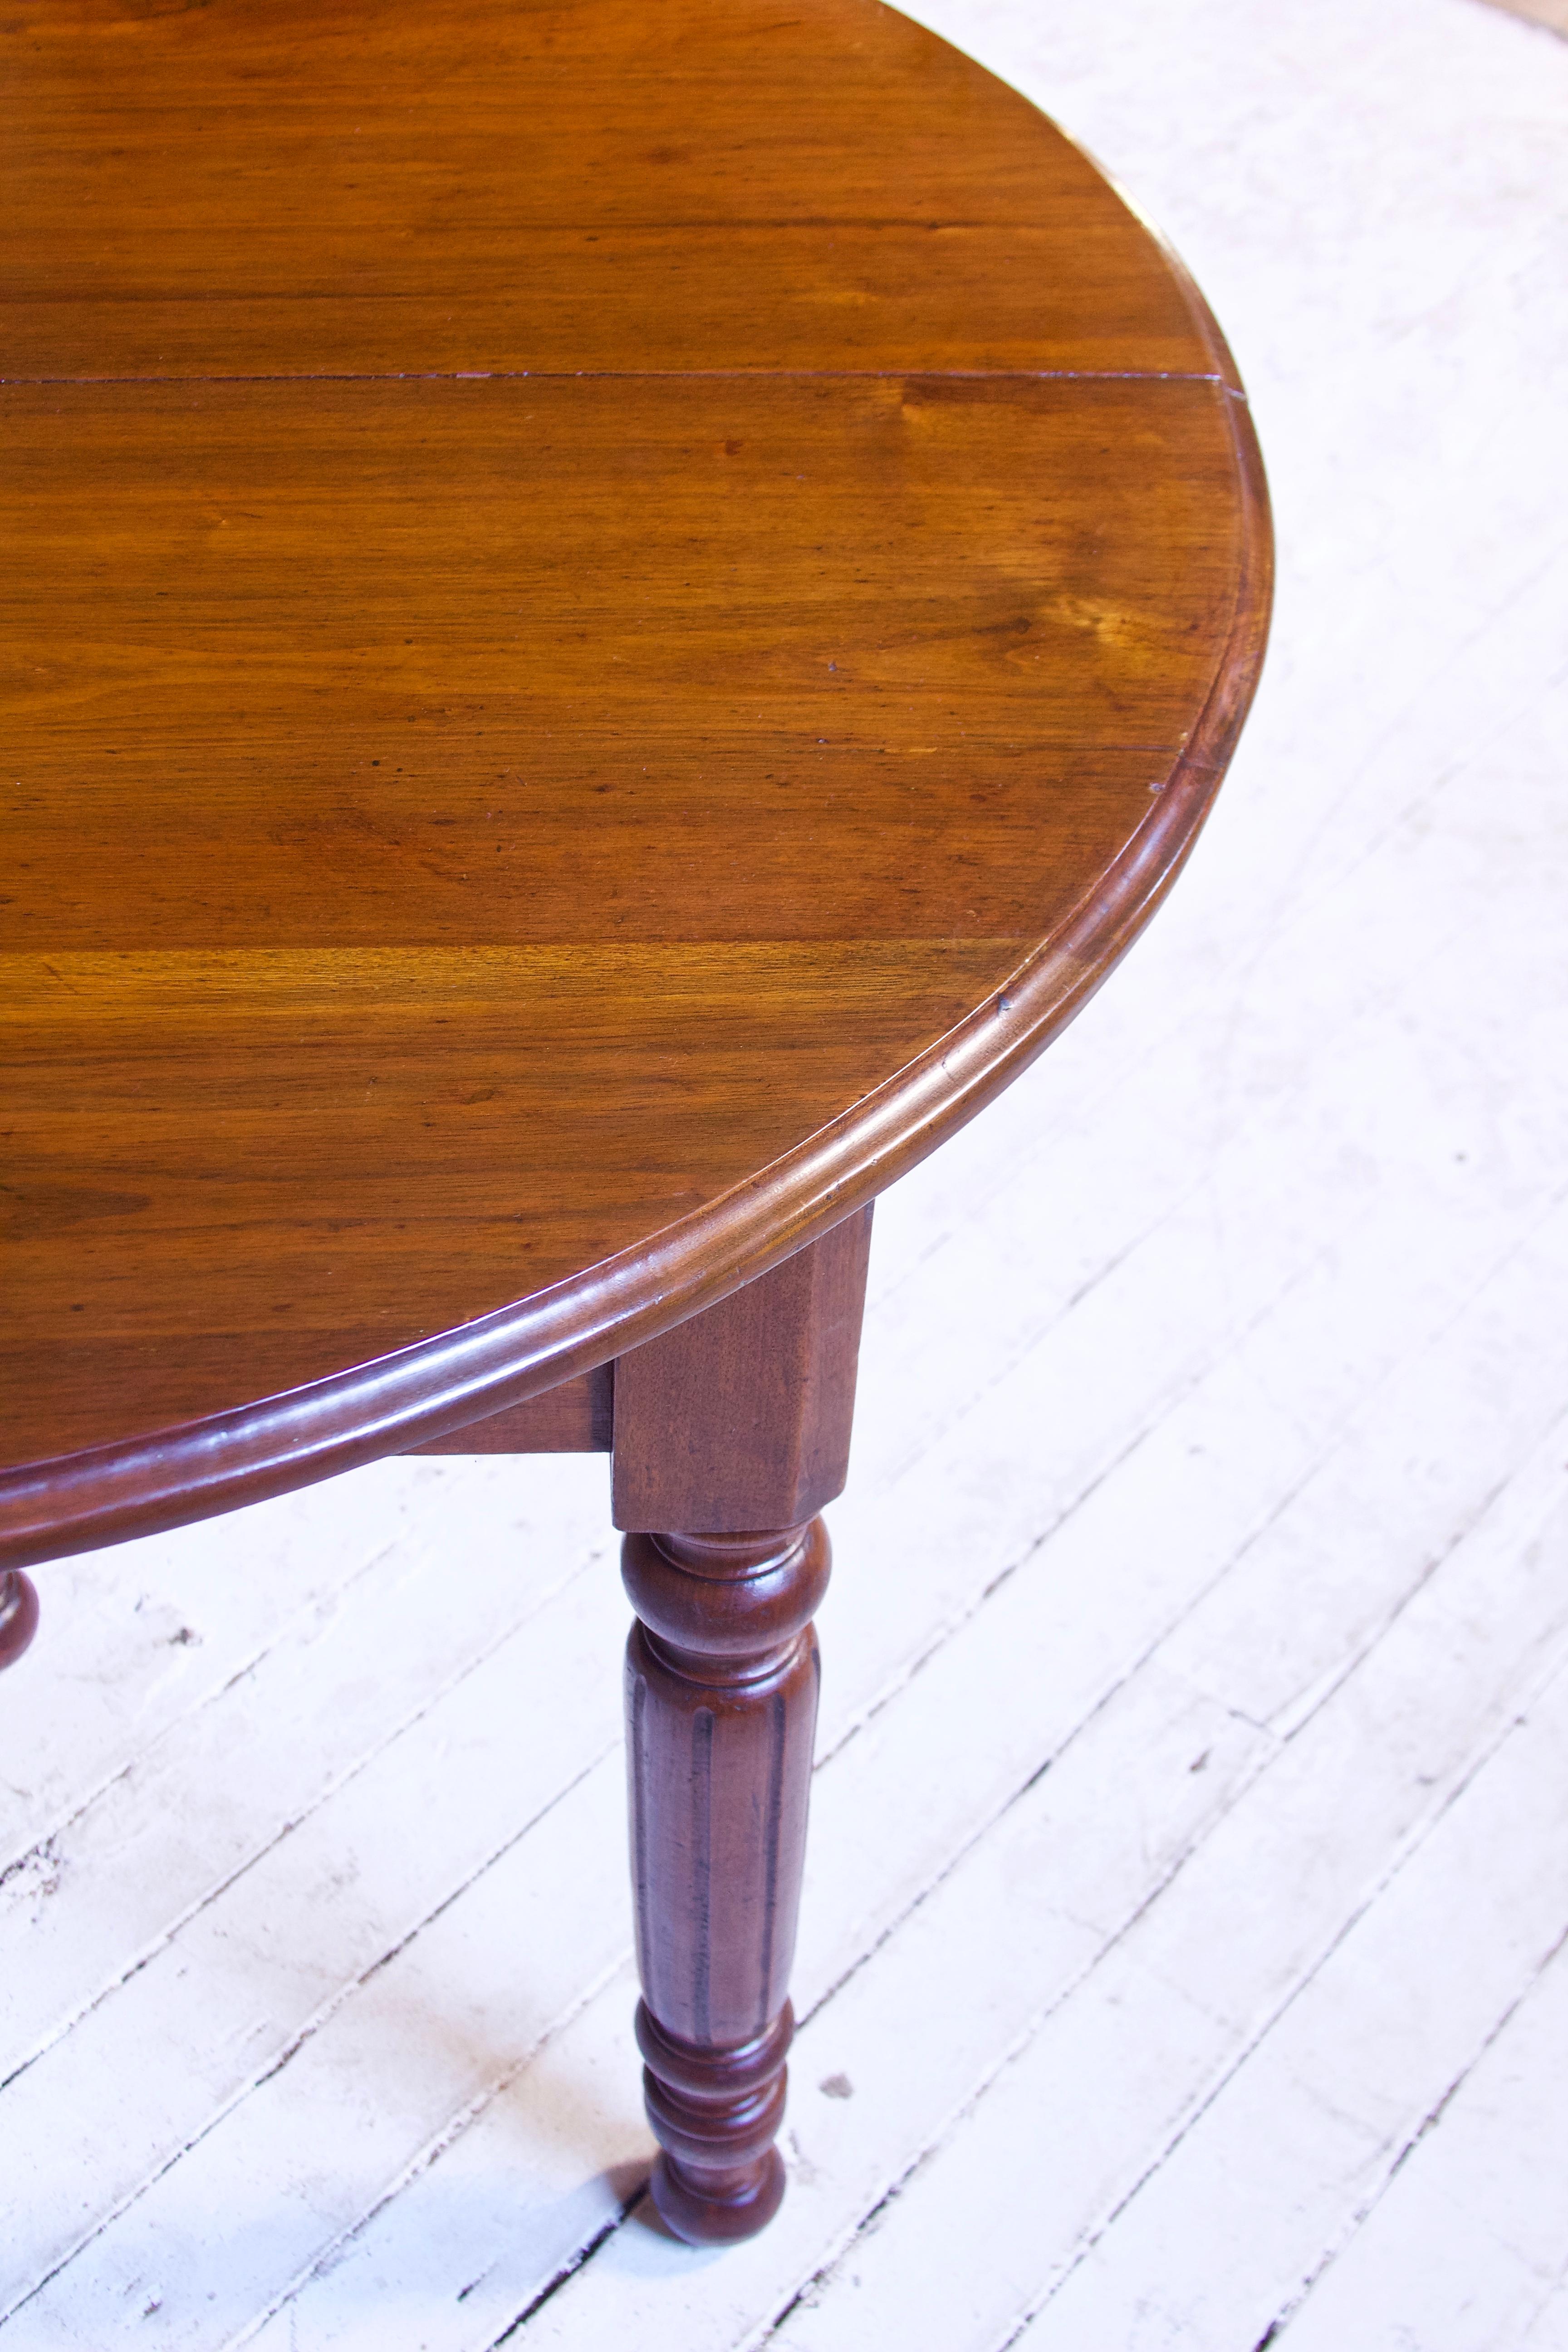 Mid-19th Century Antique Walnut 19th Century Extension Dining Table with Turned Legs, 1850s